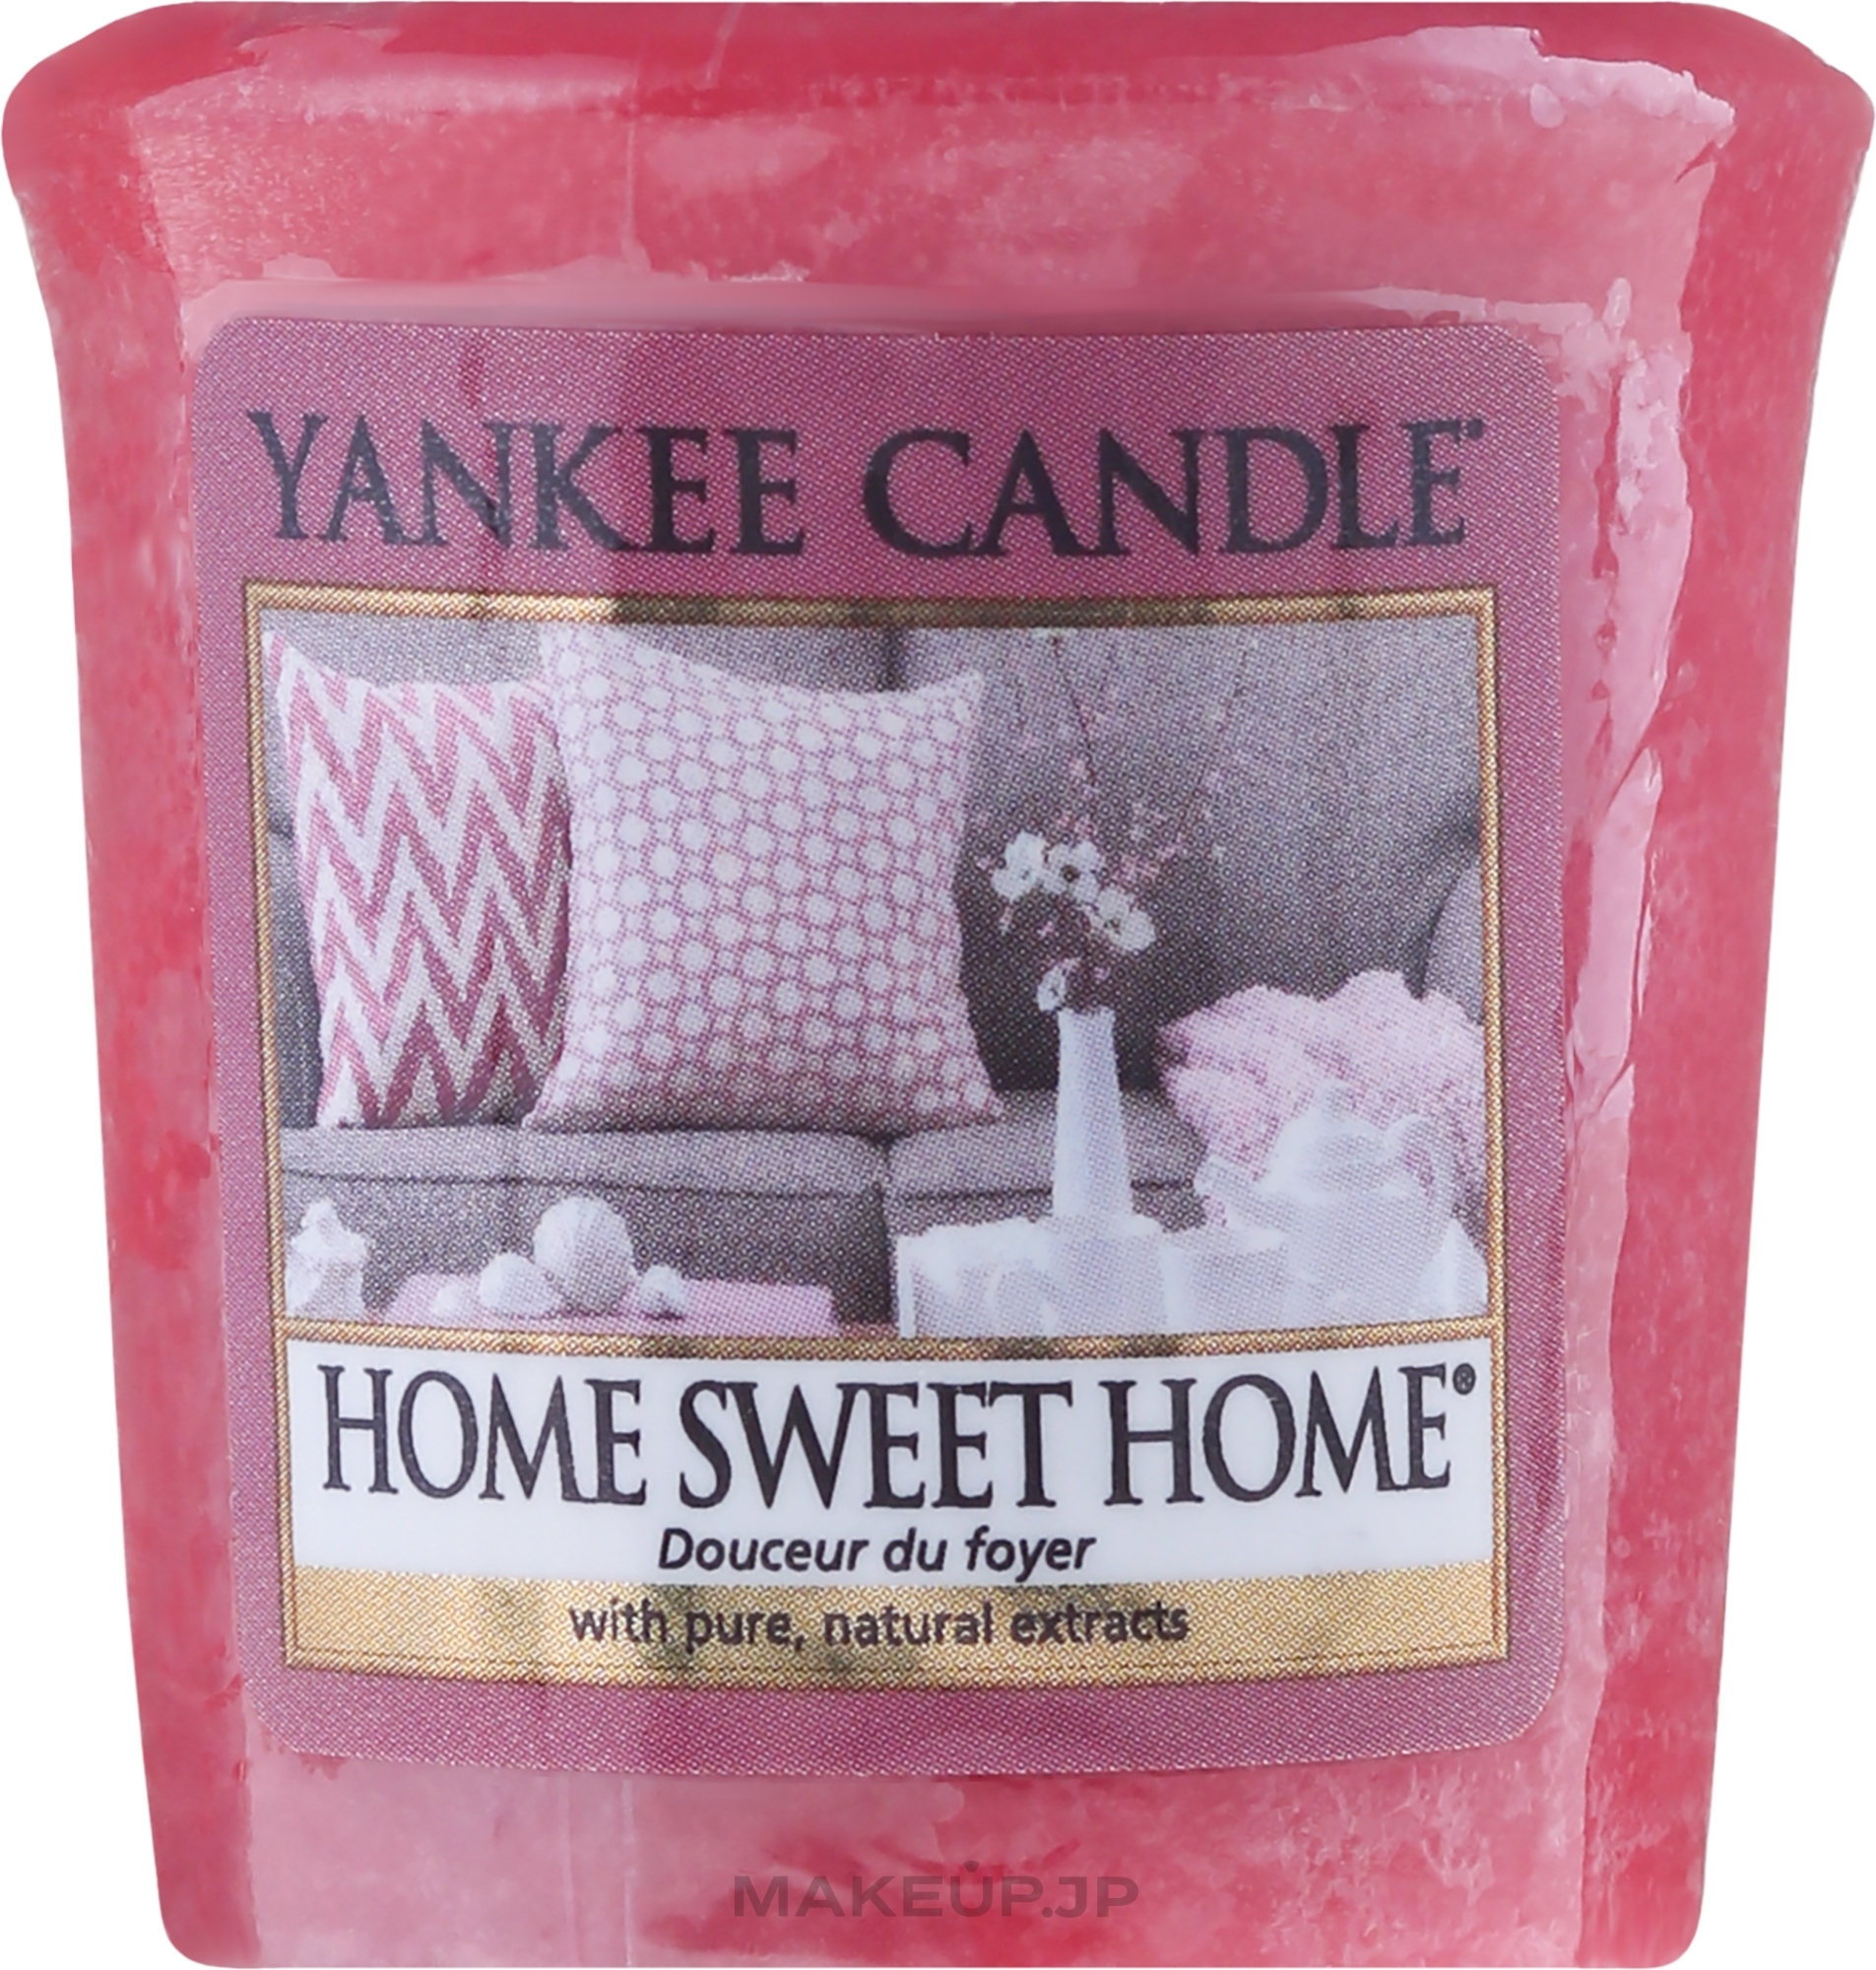 Scented Candle "Home Sweet Home" - Yankee Candle Scented Votive Home Sweet Home — photo 49 g